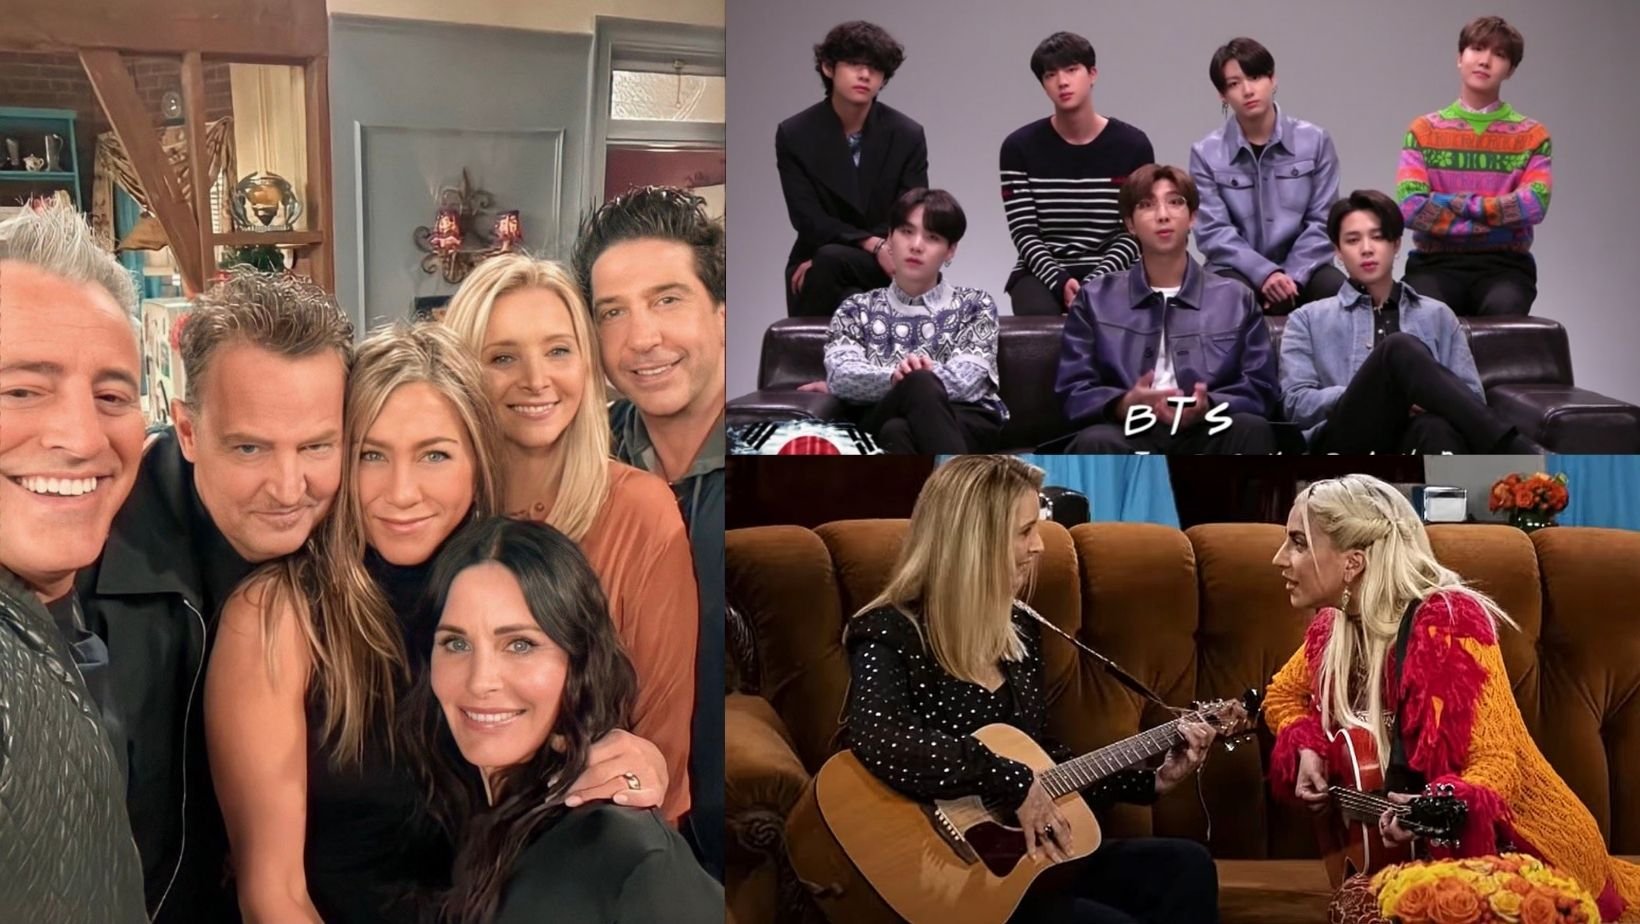 1 154.jpg?resize=1200,630 - Here’s Why BTS, Lady Gaga & Justin Bieber Scenes Were Cut From ‘Friends’ Reunion Episode In China